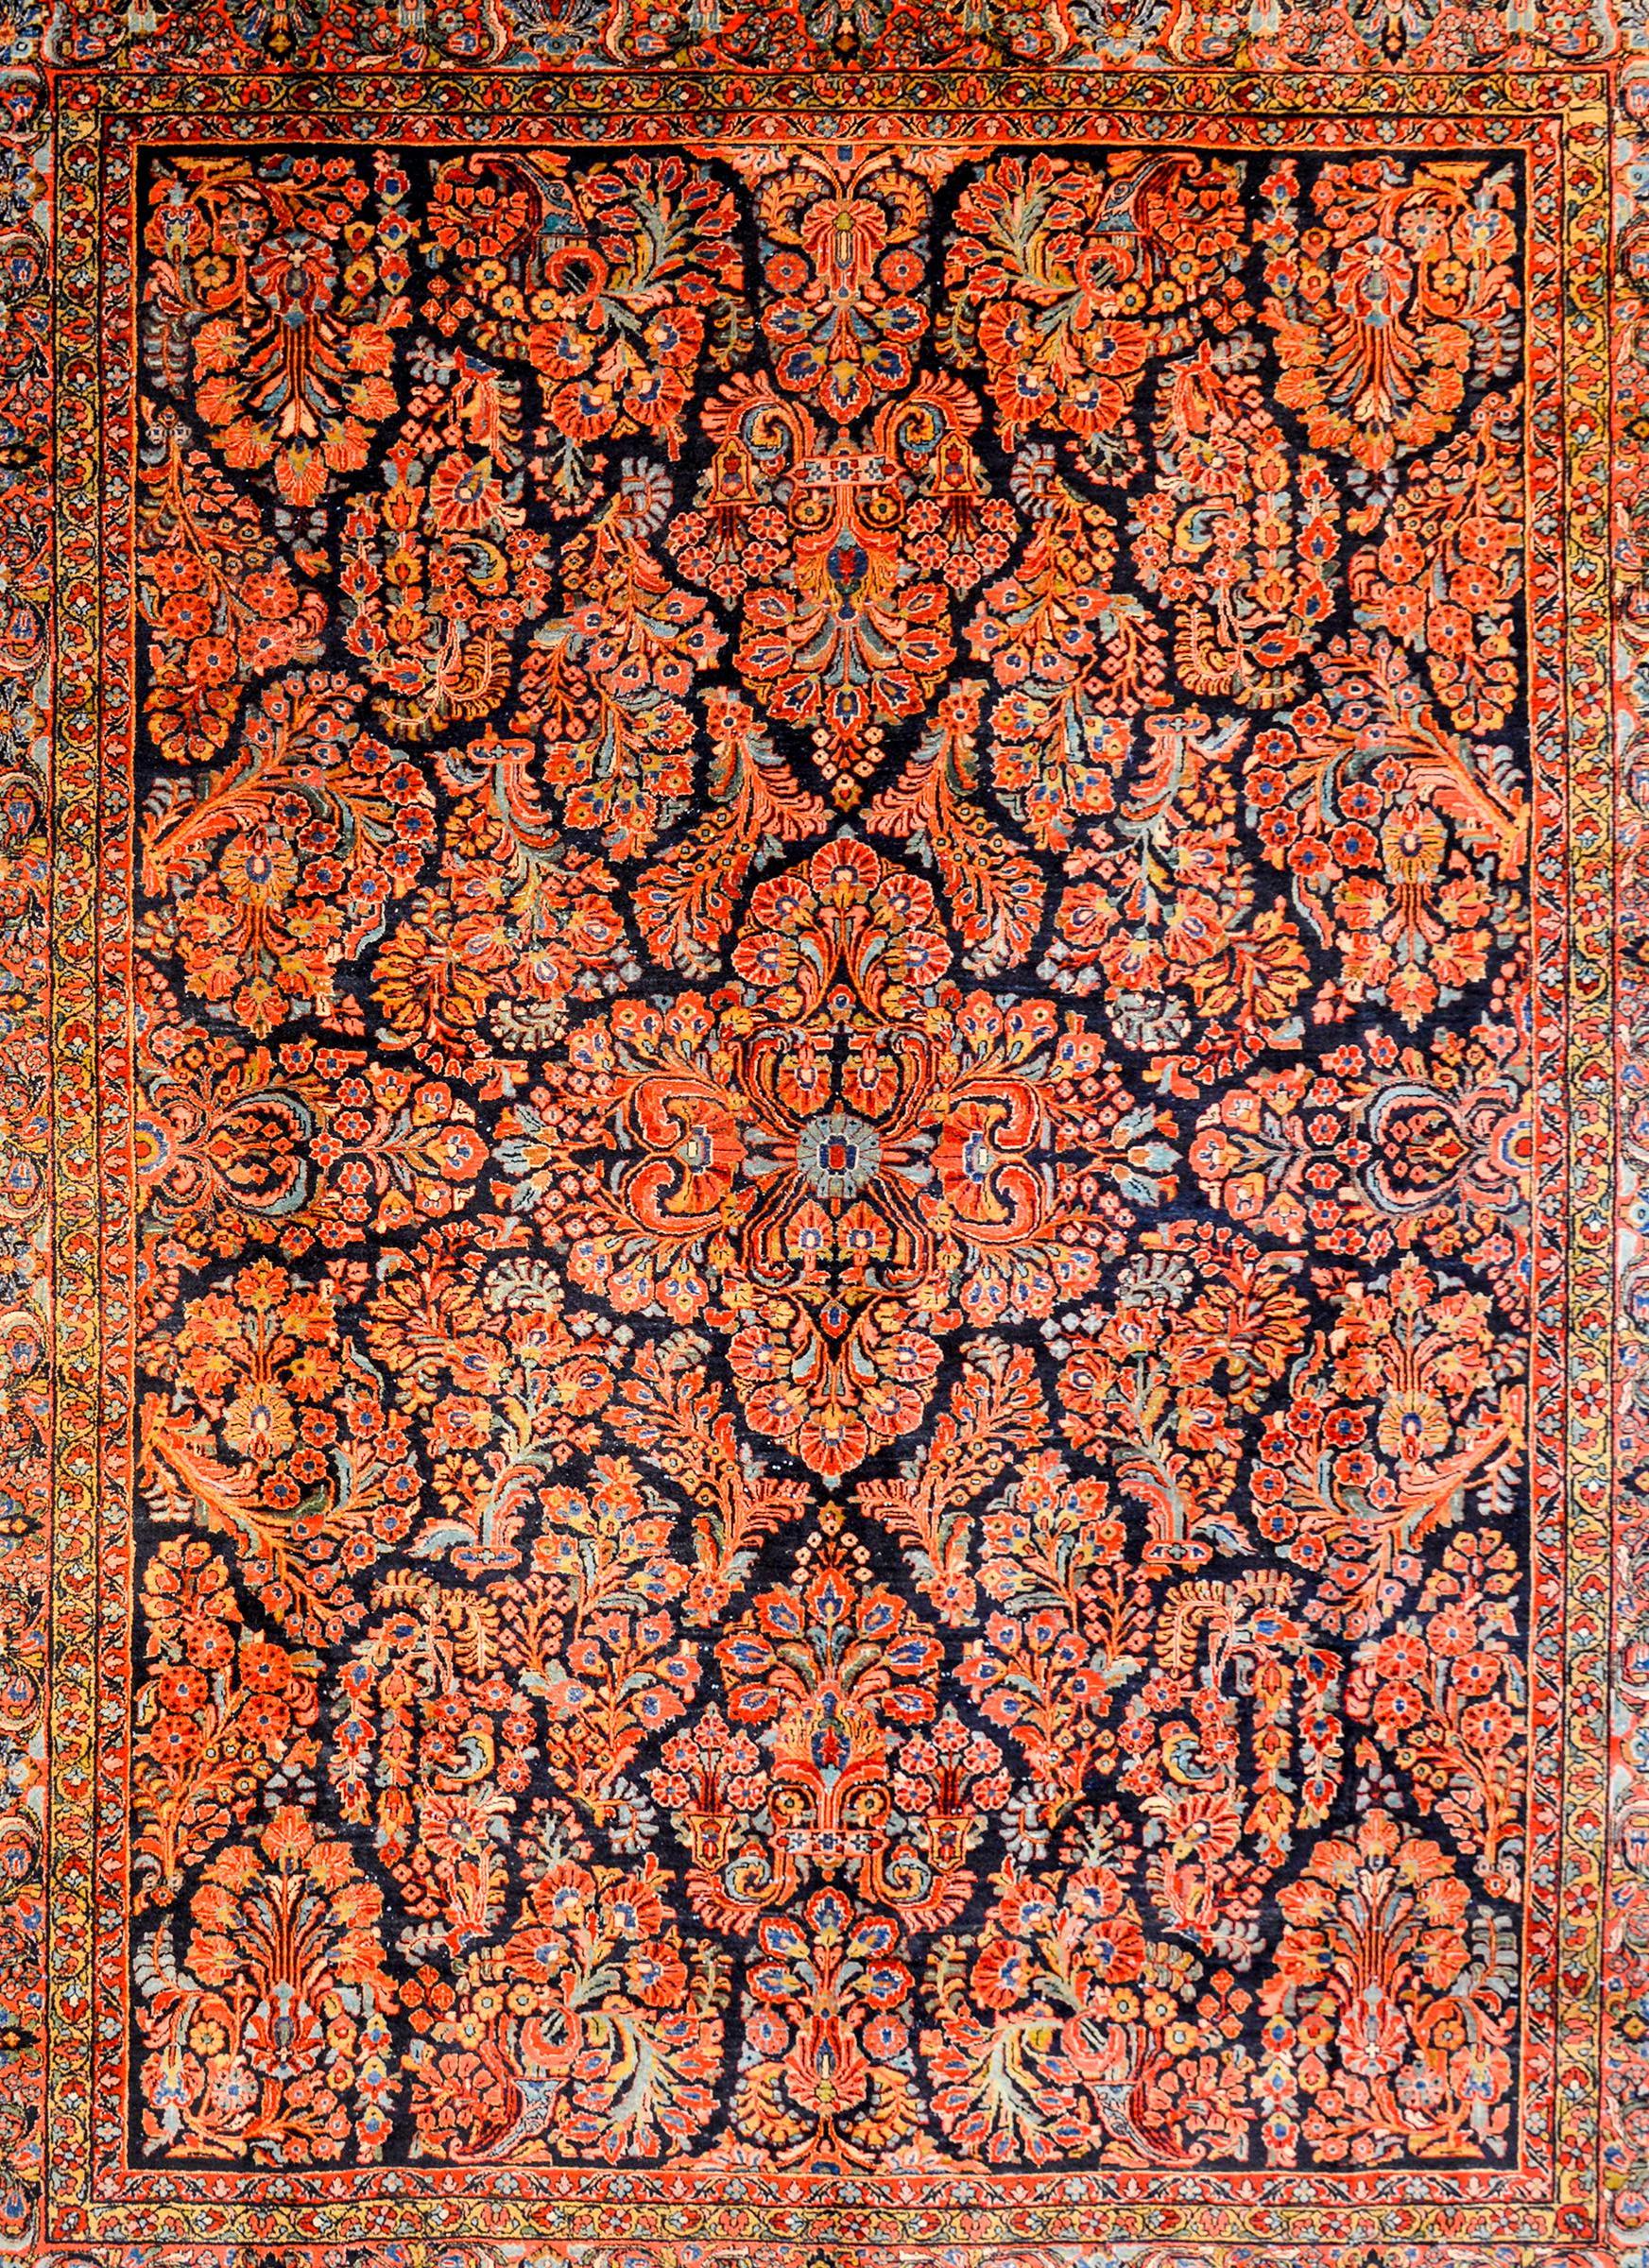 An unbelievable early 20th century Sarouk rug with the most elaborate pattern.